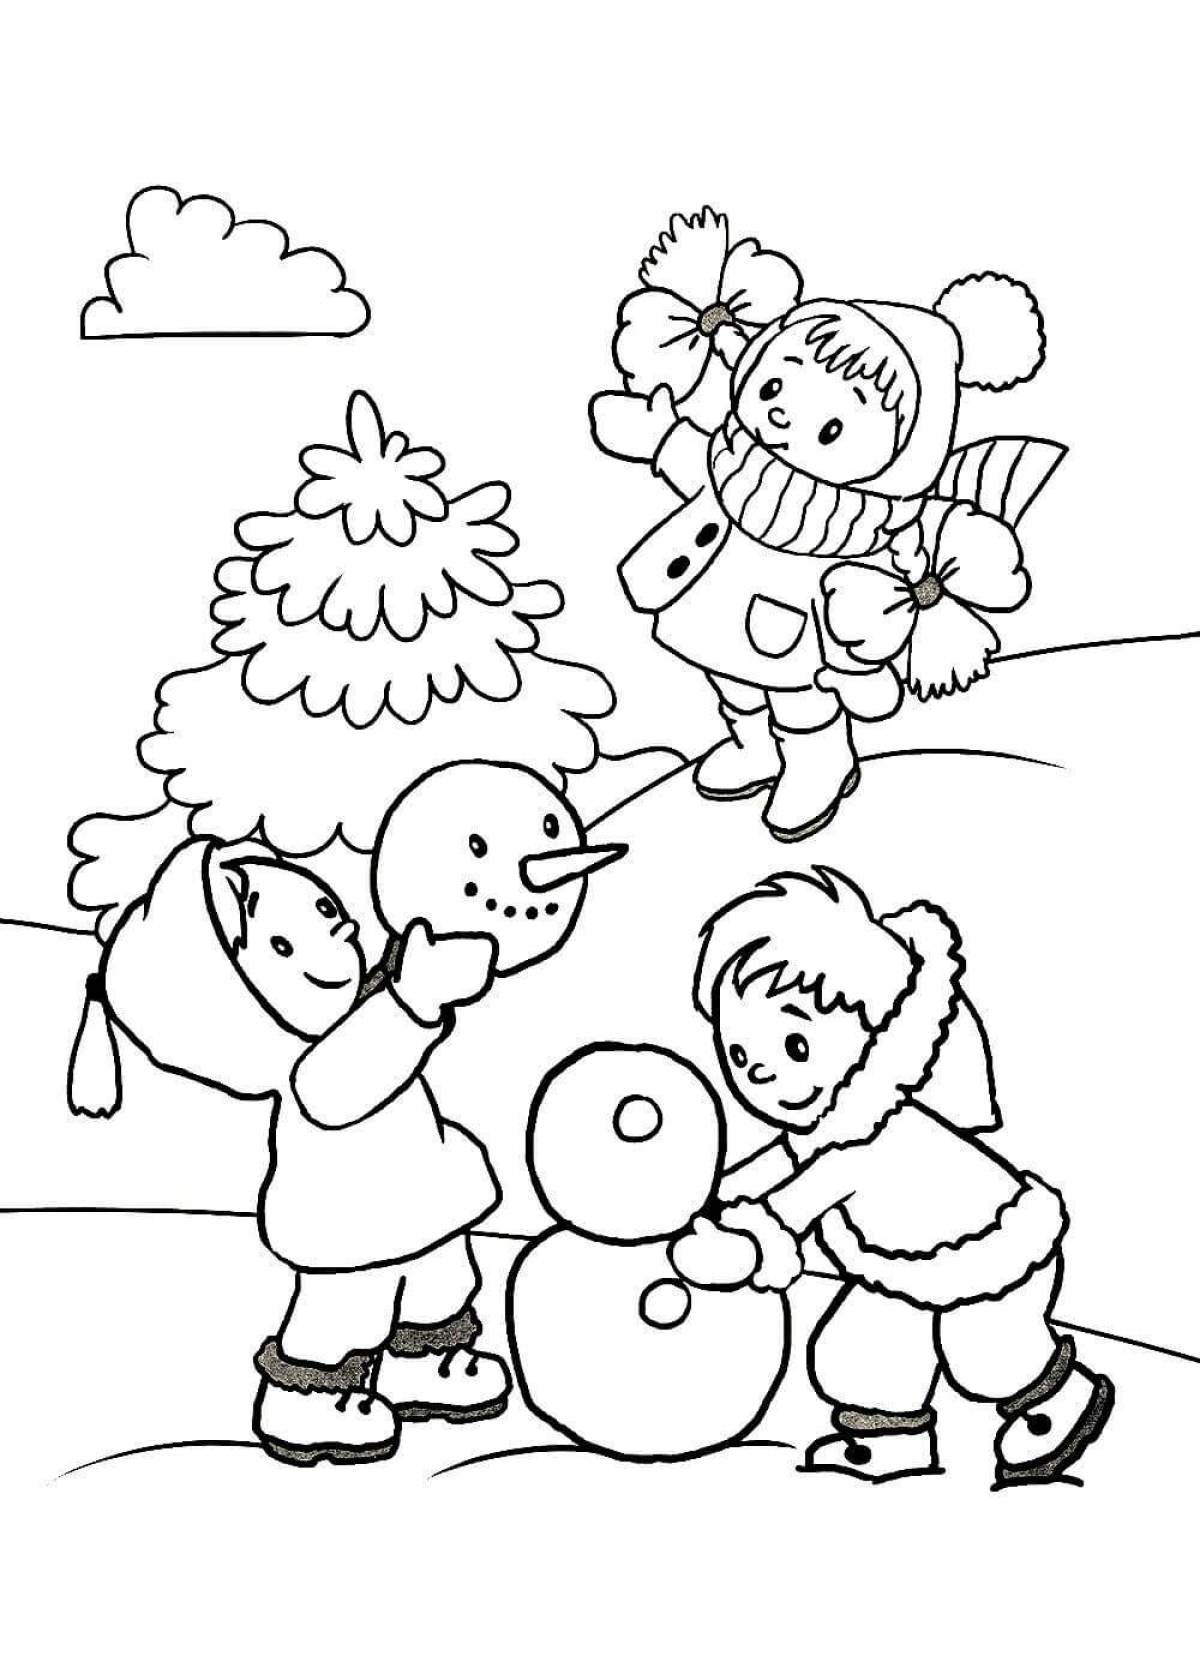 Colourful winter coloring book for children 5-6 years old